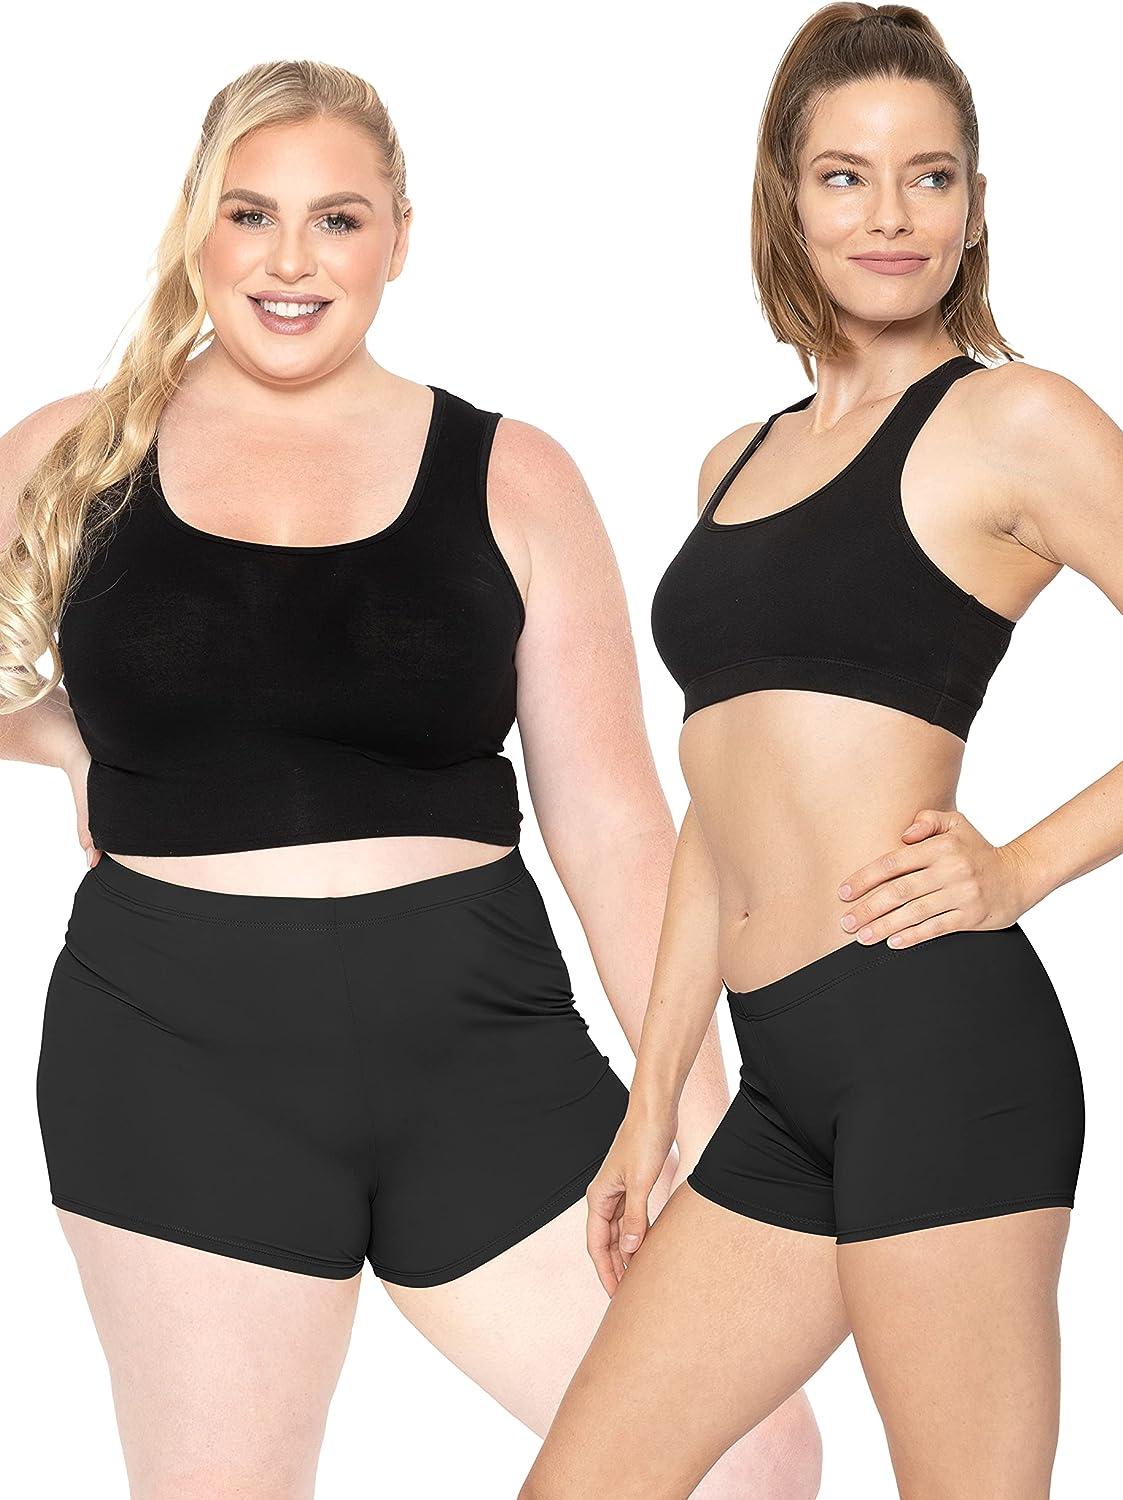 Væk Gud Tal højt STRETCH IS COMFORT Women's and Plus Size Nylon Booty Shorts | S-3X 2.5"  Inseam X-Small Black